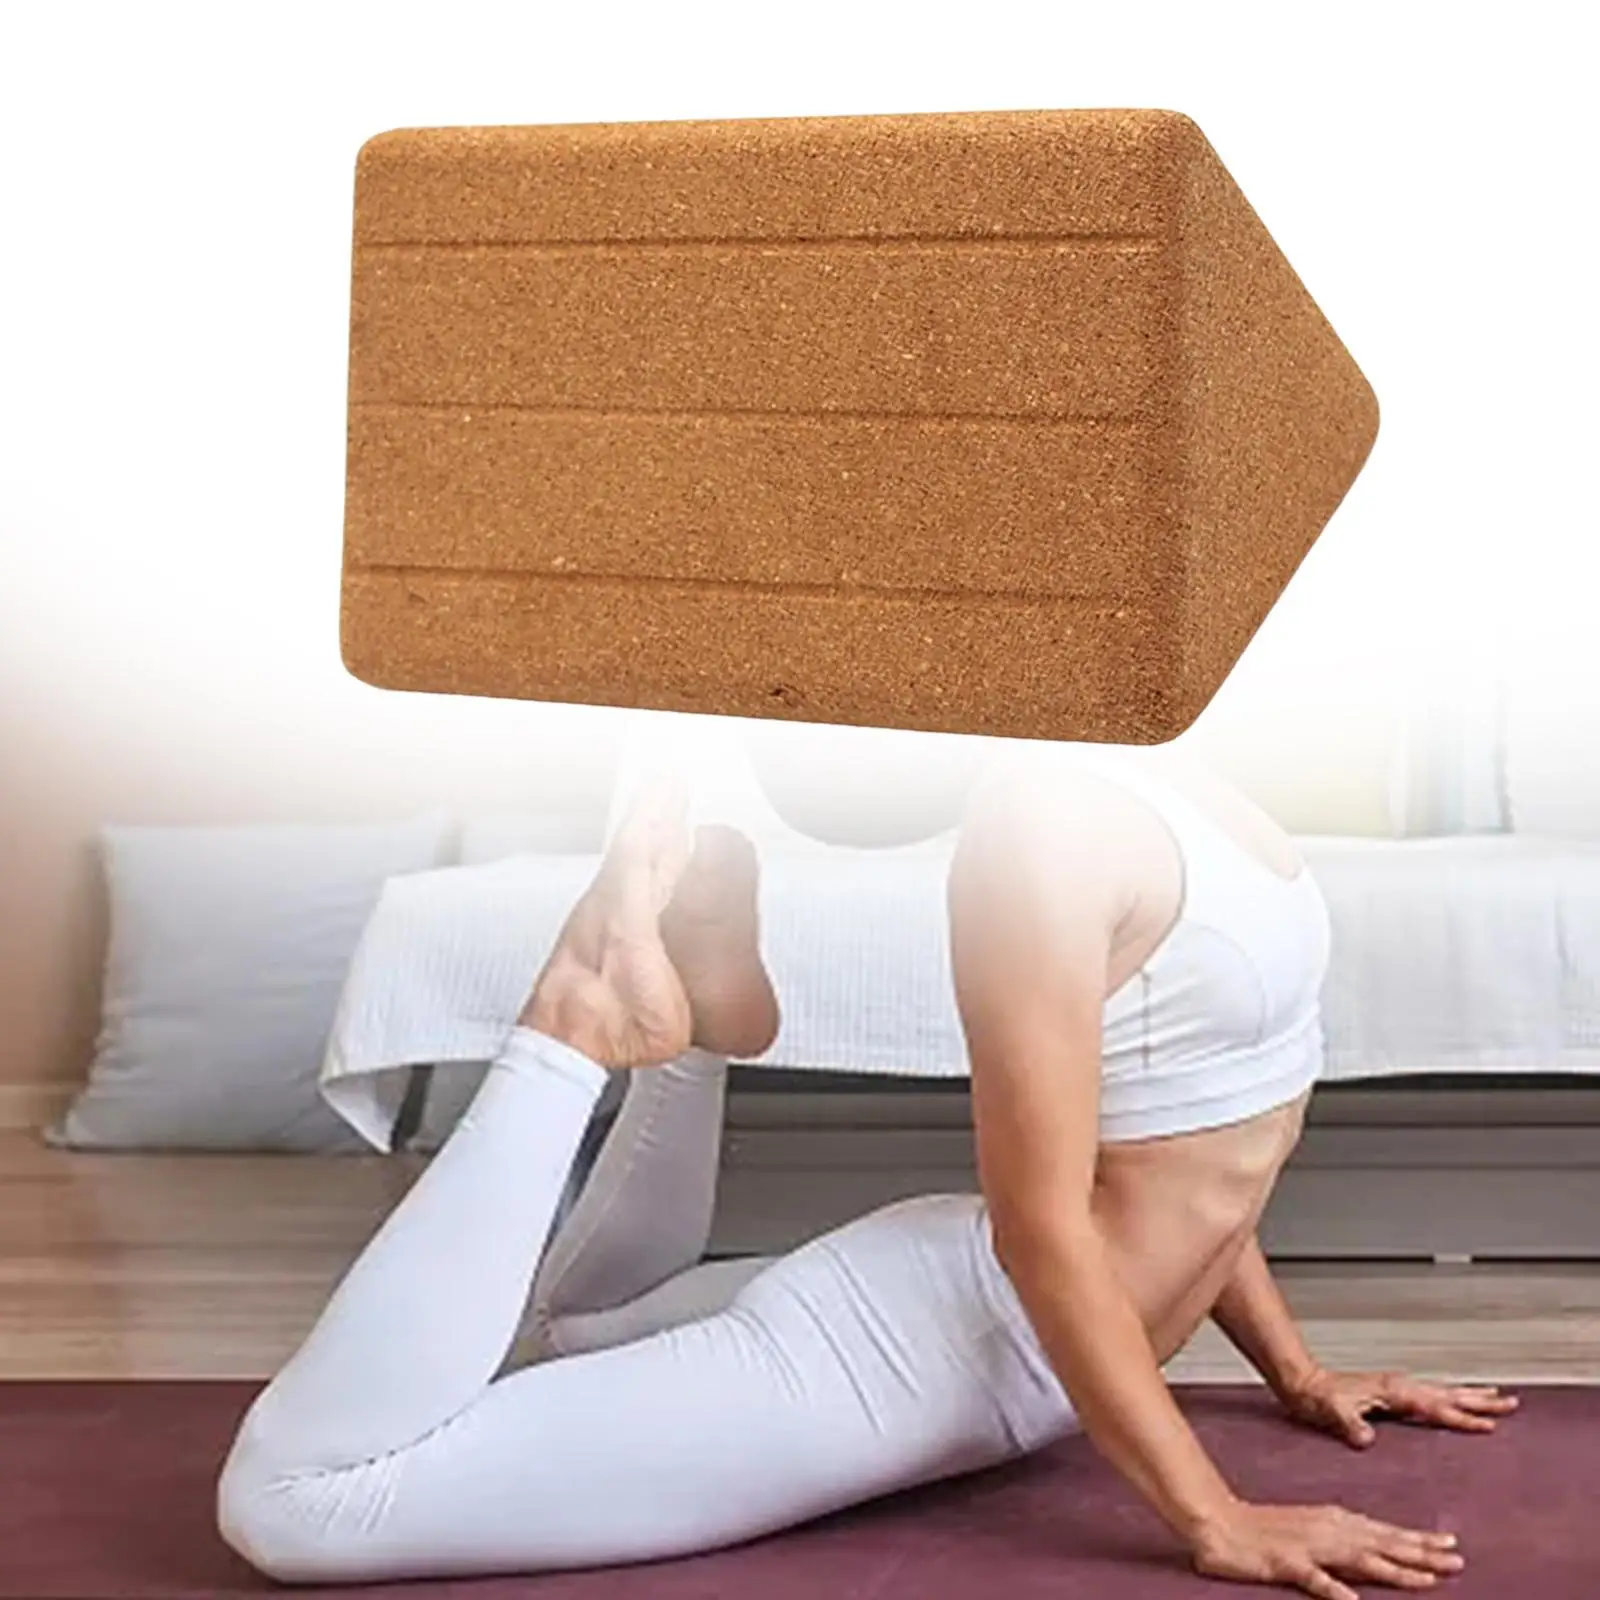 Triangle Yoga Brick Exercise Brick Yoga Prop Accessory for Workout Pilates